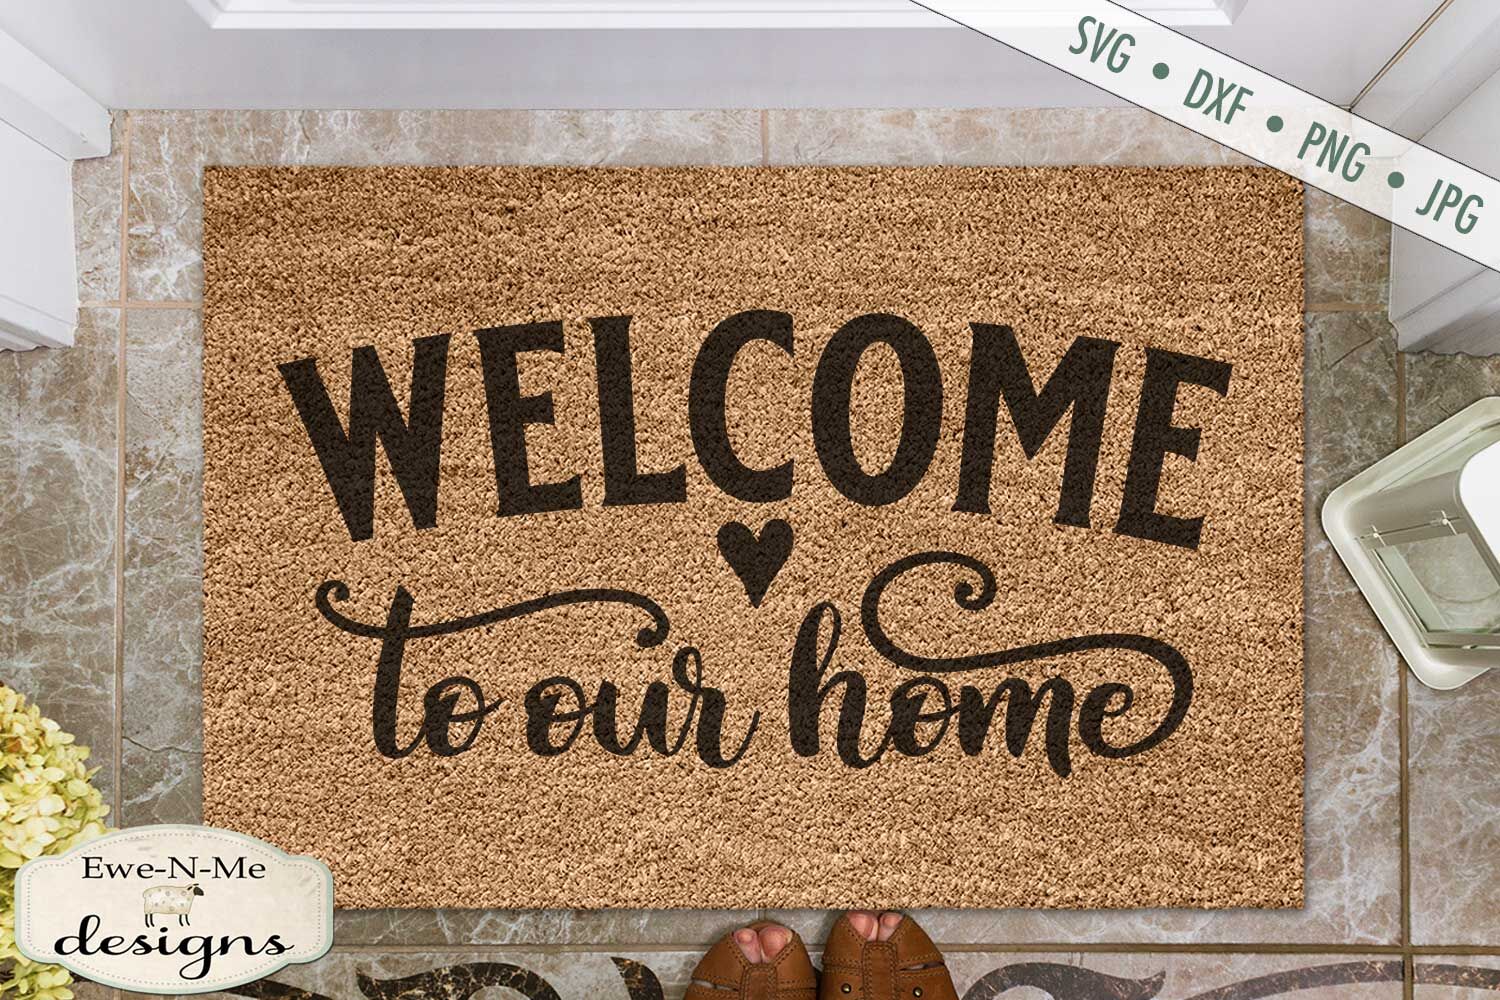 Welcome To Our Home Doormat Svg By Ewe N Me Designs Thehungryjpeg Com